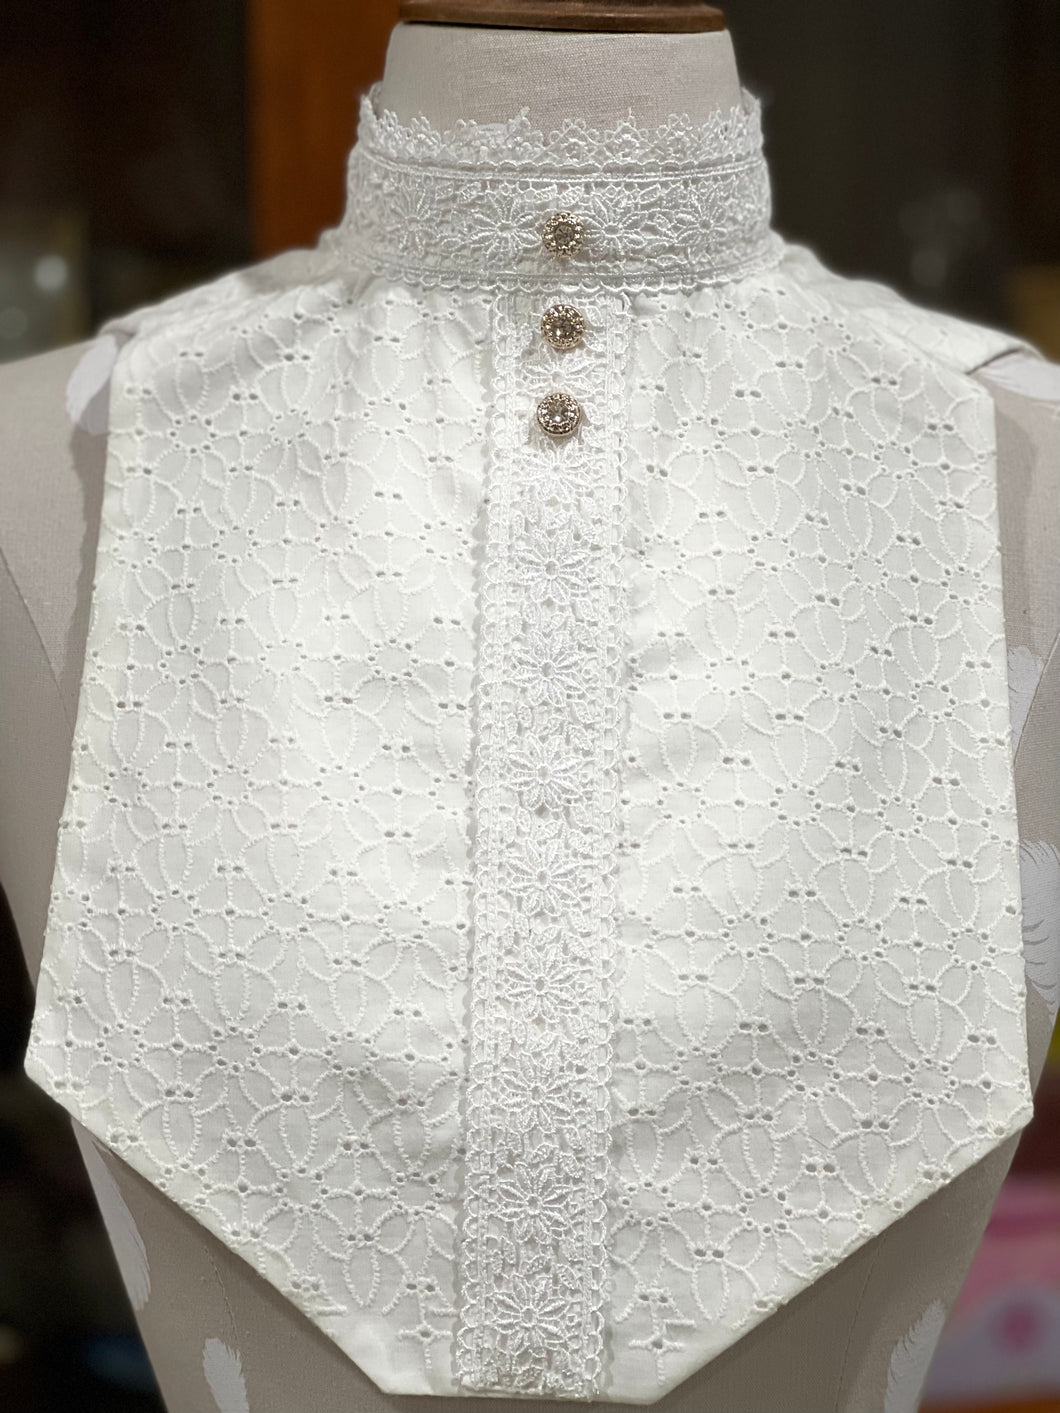 Embroidered floral and lace bib with rose gold and “diamond” buttons